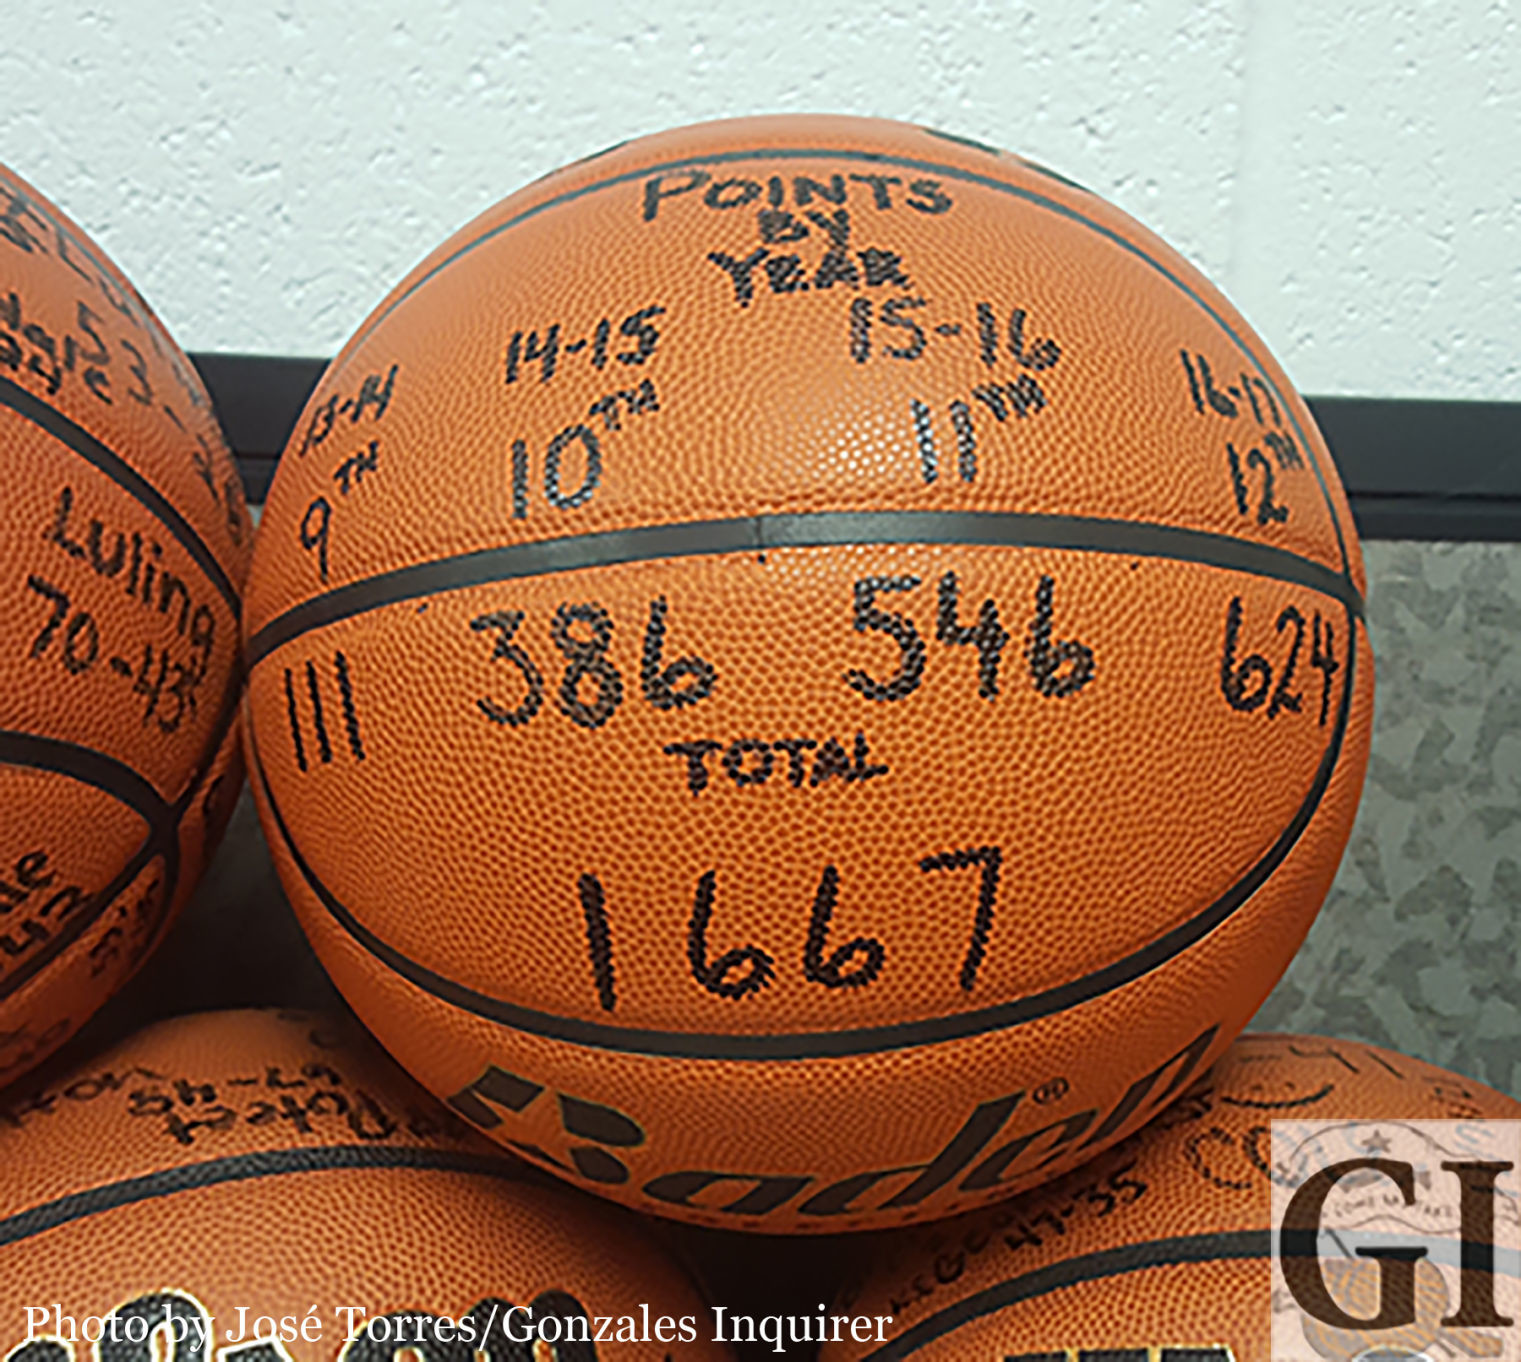 Celeste’s point totals were written on this ball to celebrate the great shooting she had in her Nixon-Smiley career.